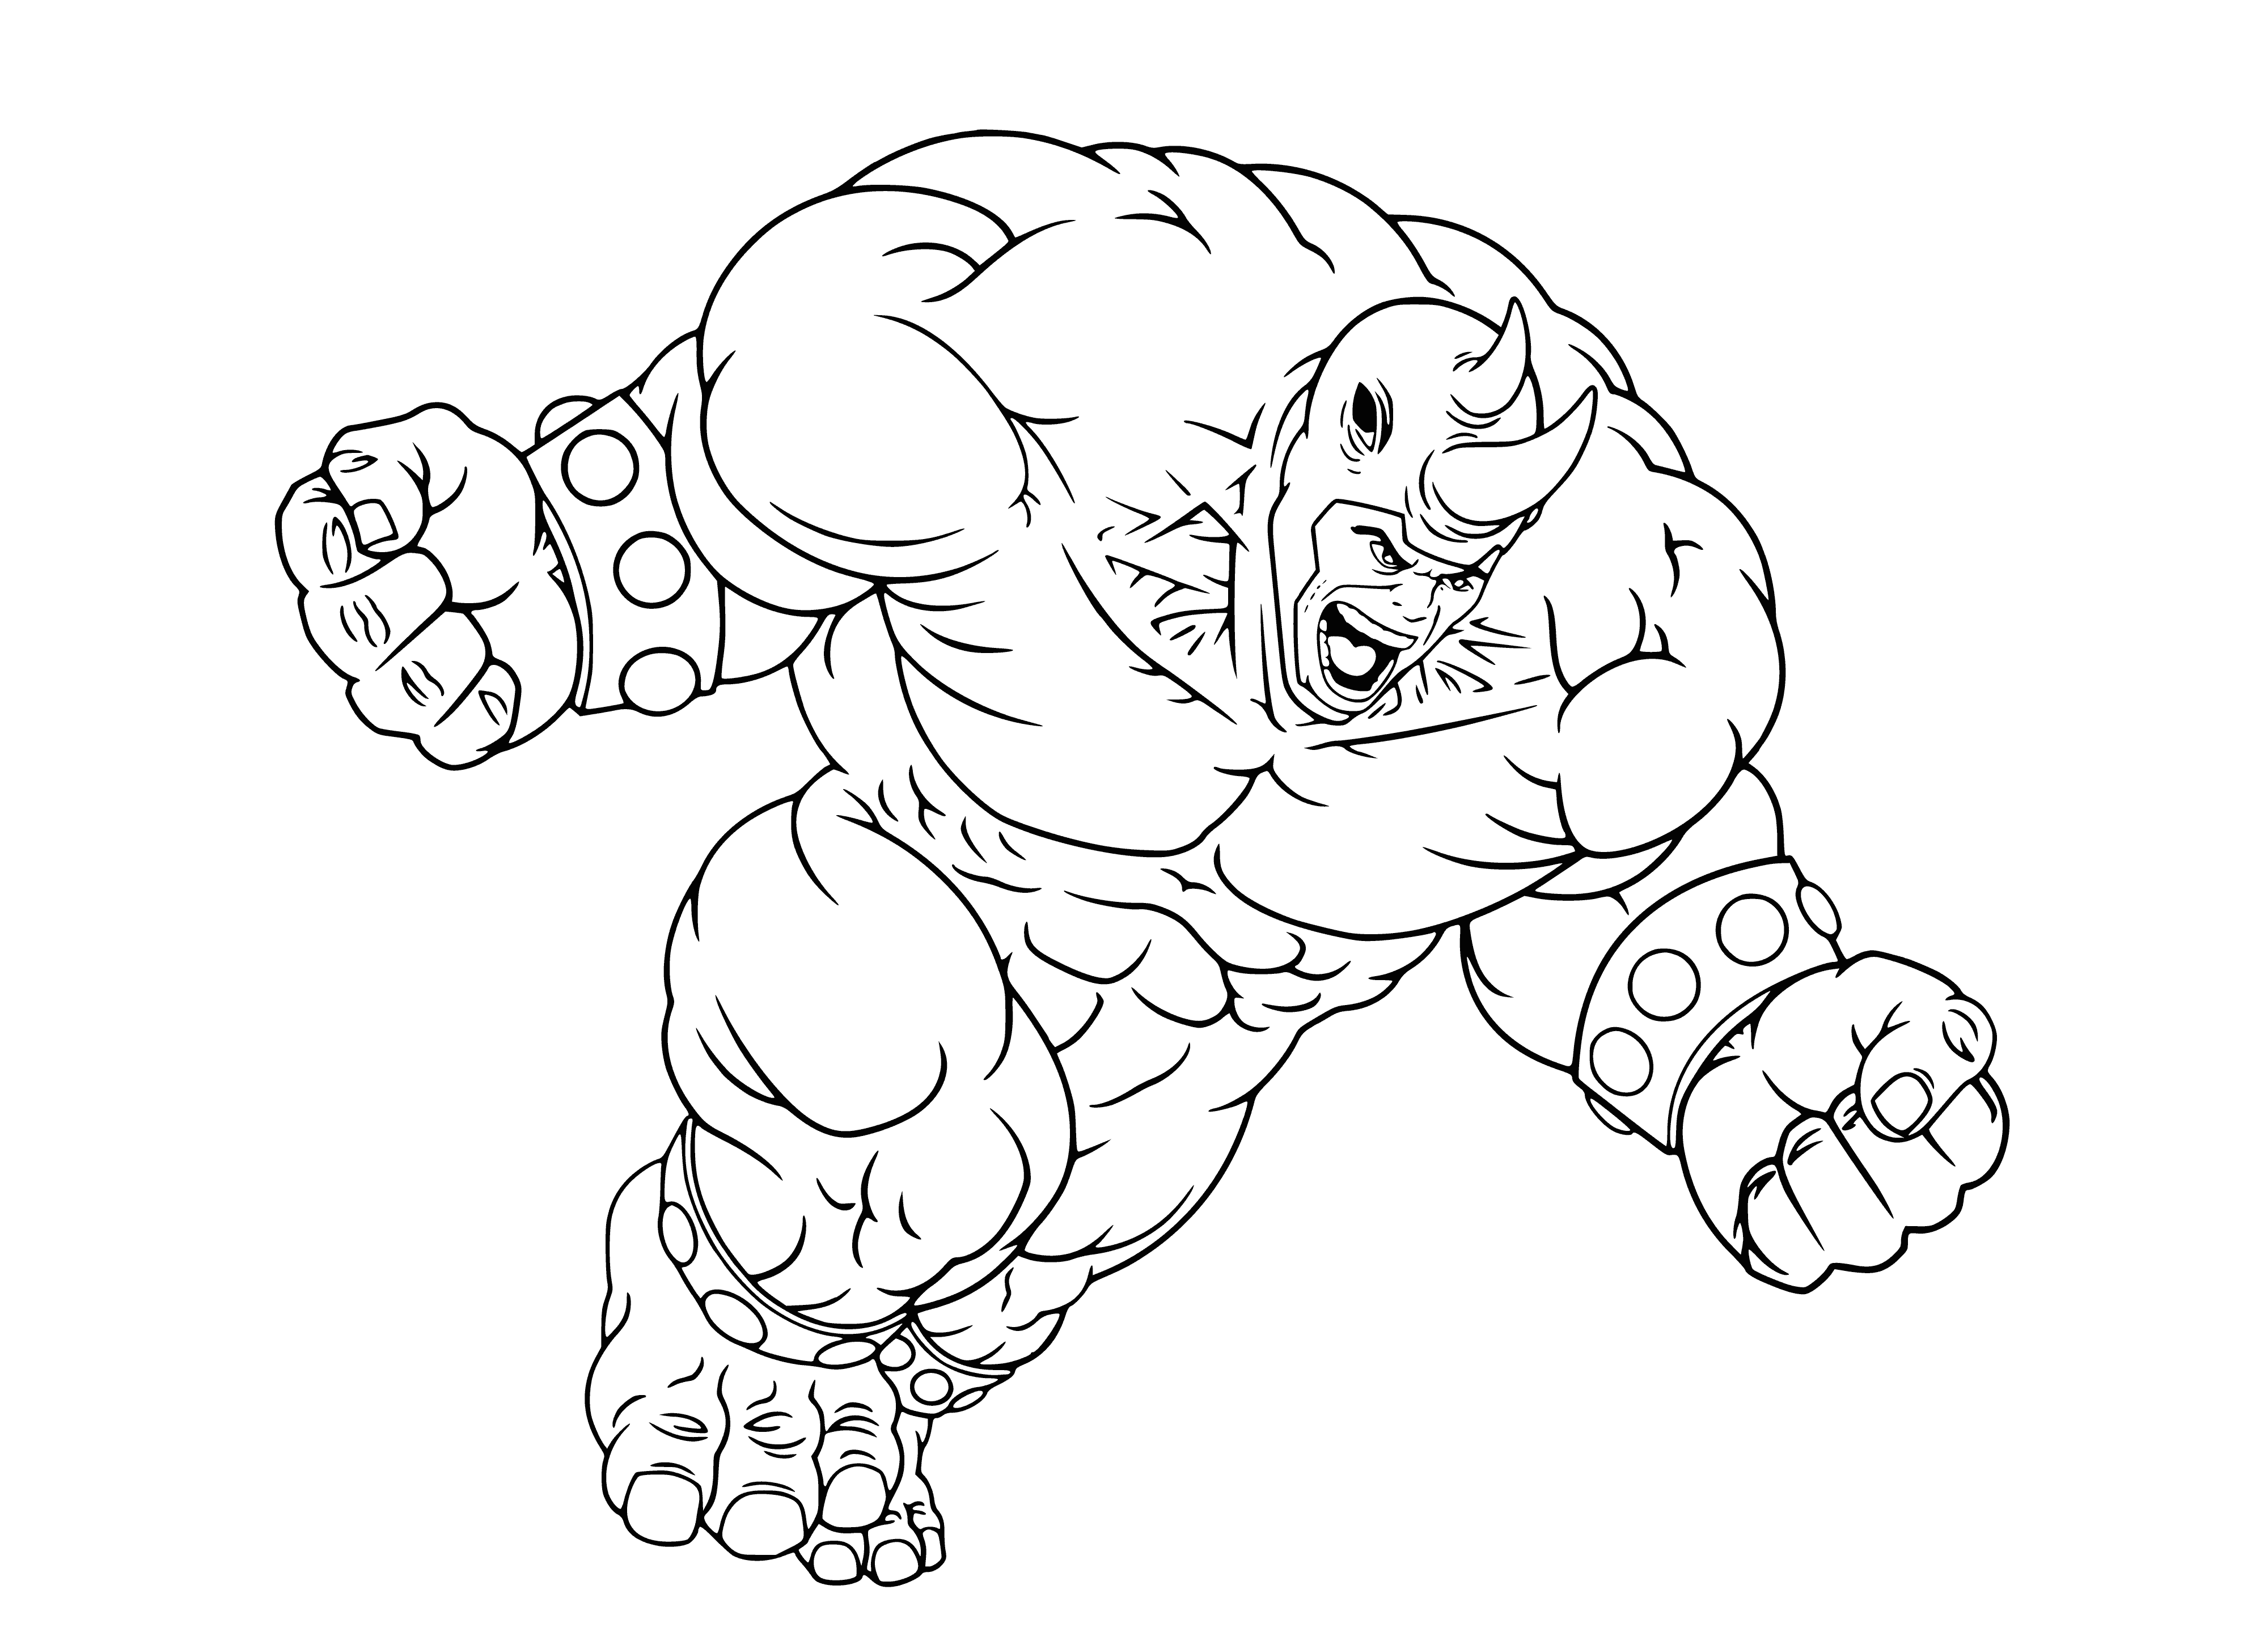 coloring page: Superhero fight! Spider-Man vs Rhino in a colorful boxing match